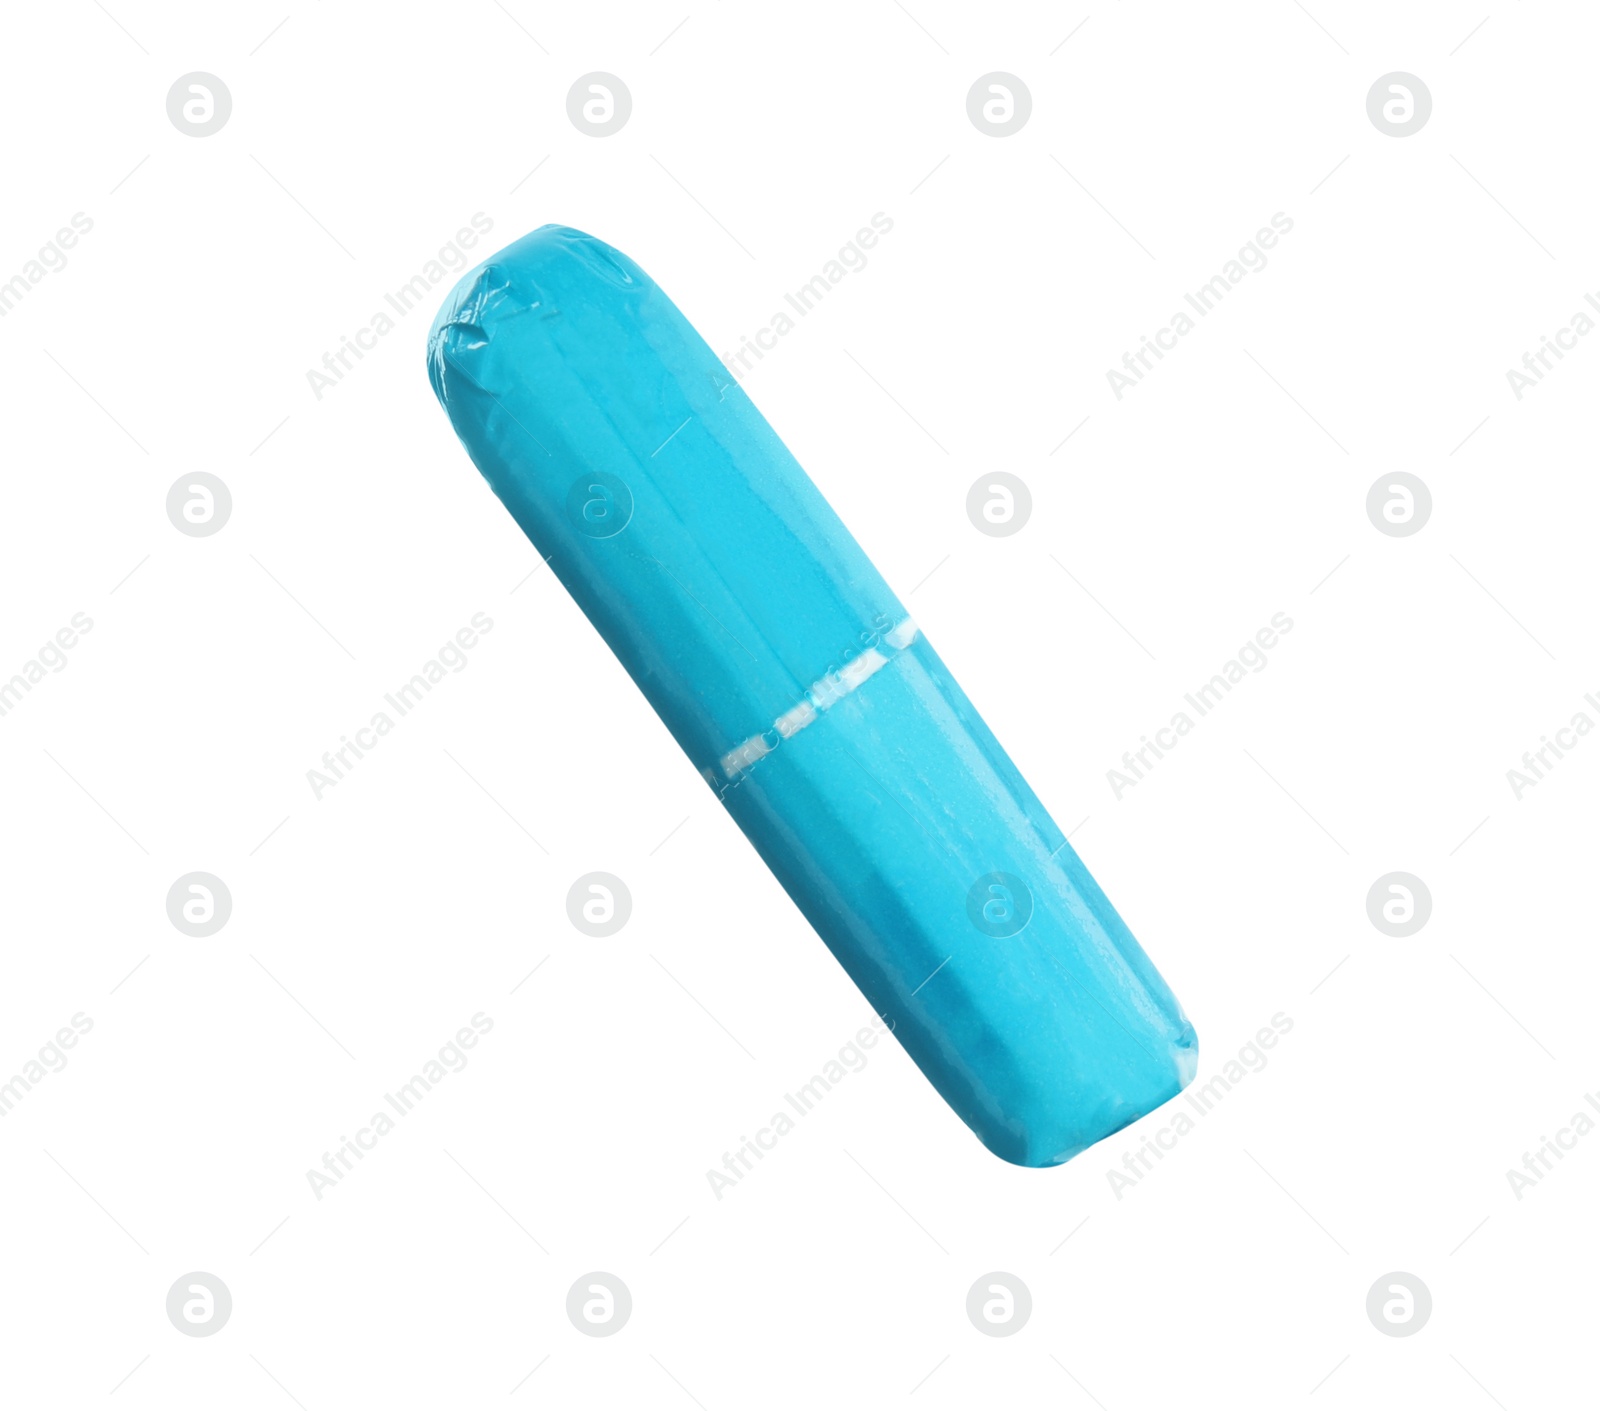 Photo of Tampon in turquoise package isolated on white